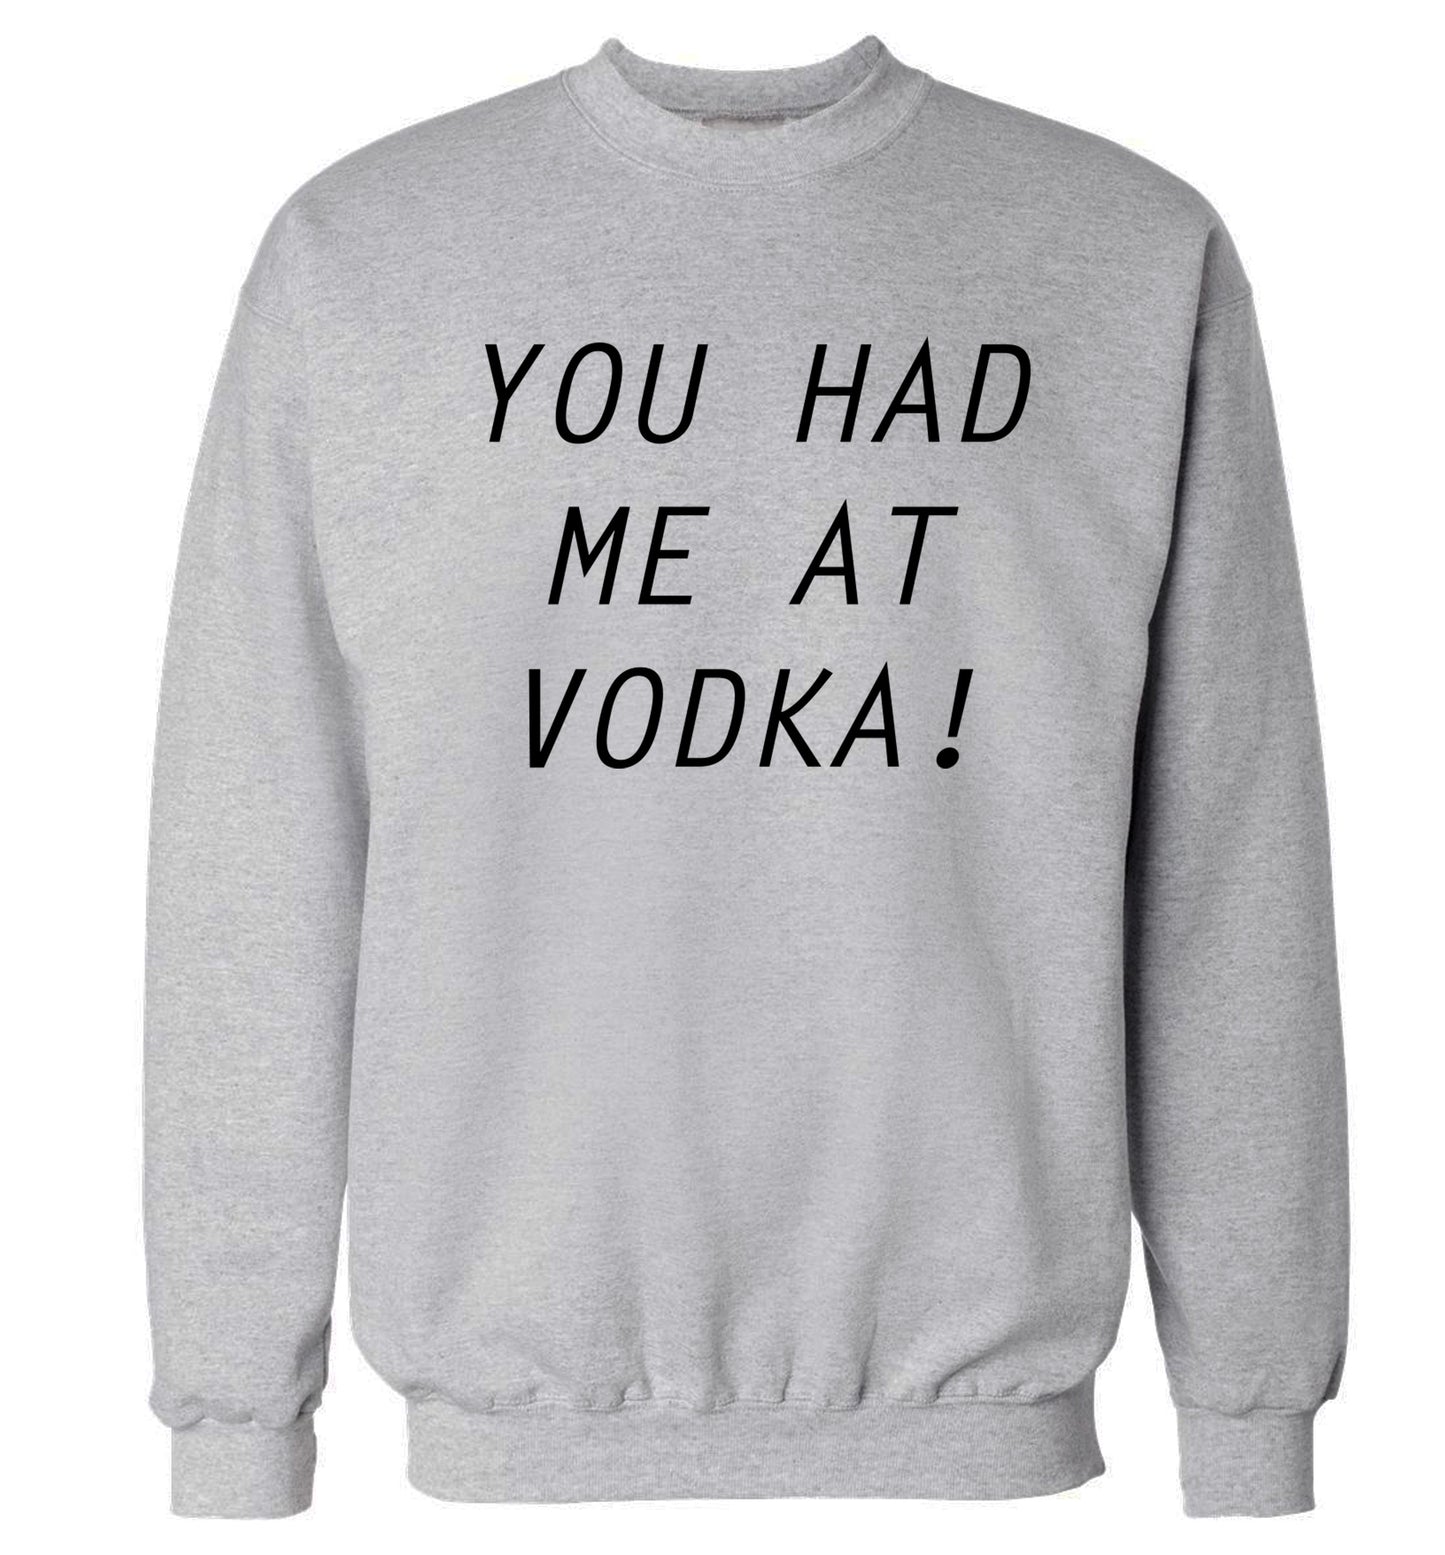 You had me at vodka Adult's unisex grey Sweater 2XL